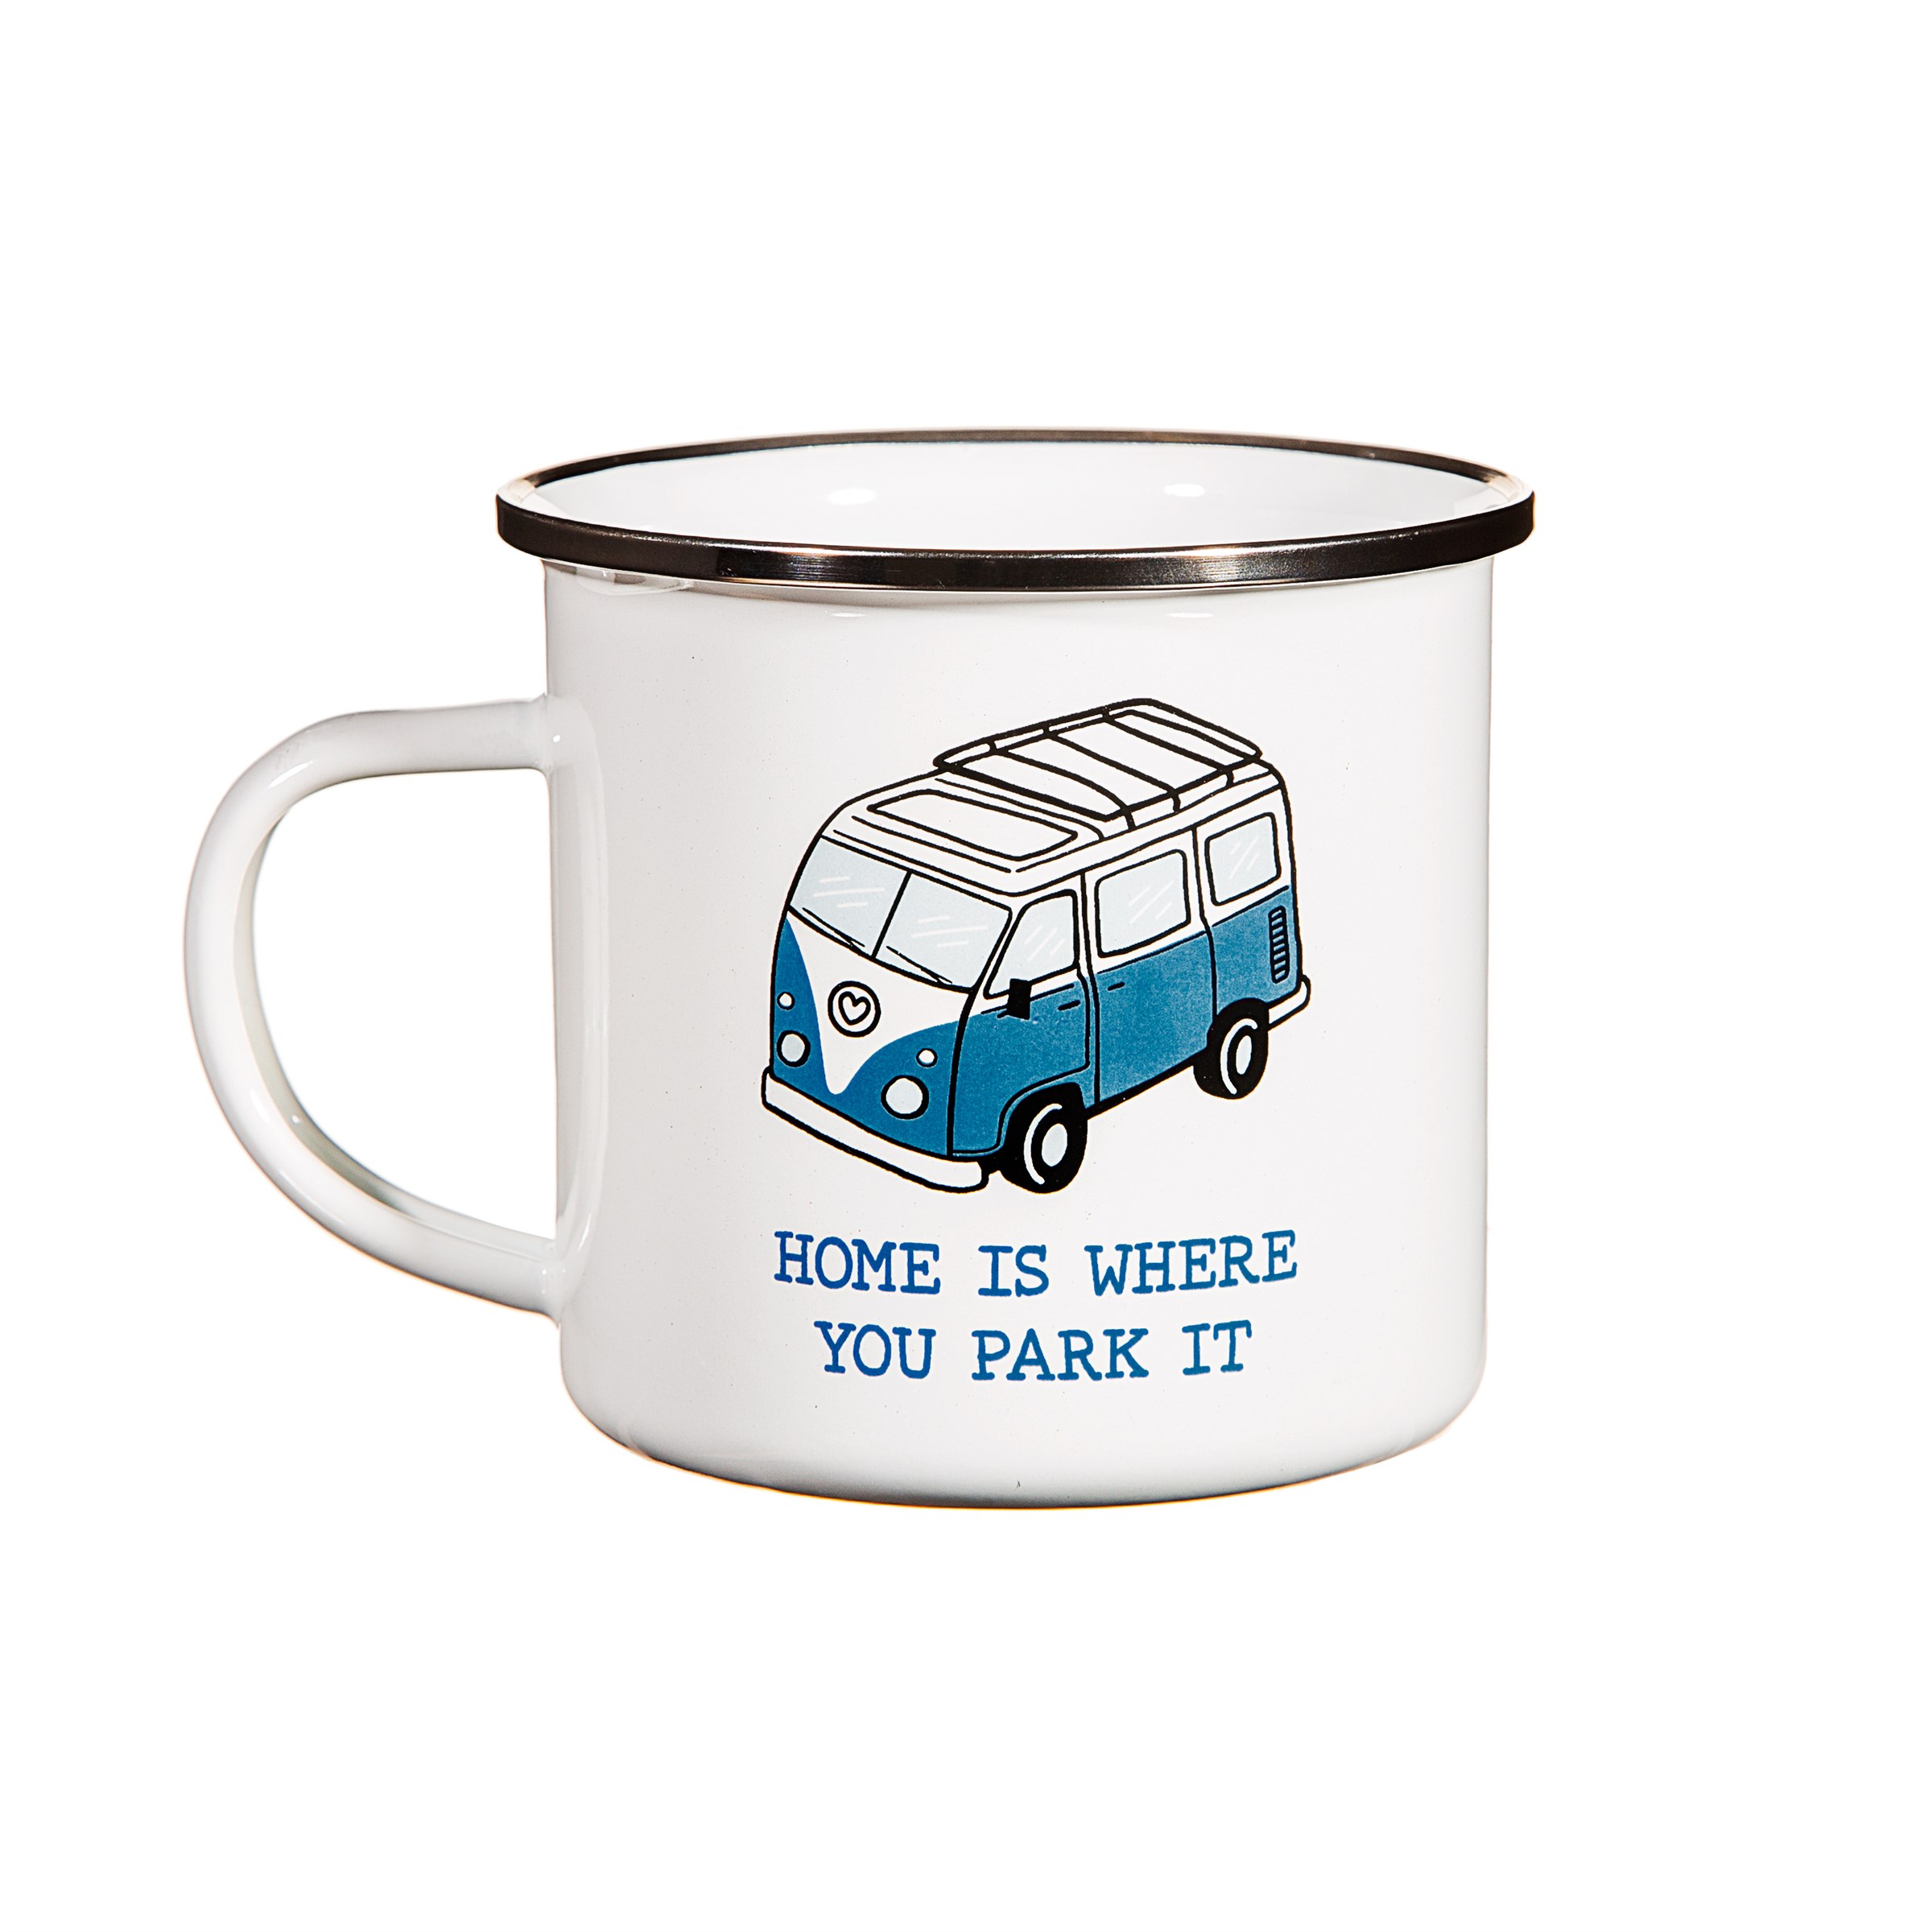 sass-and-belle-home-is-where-you-park-it-enamel-mug